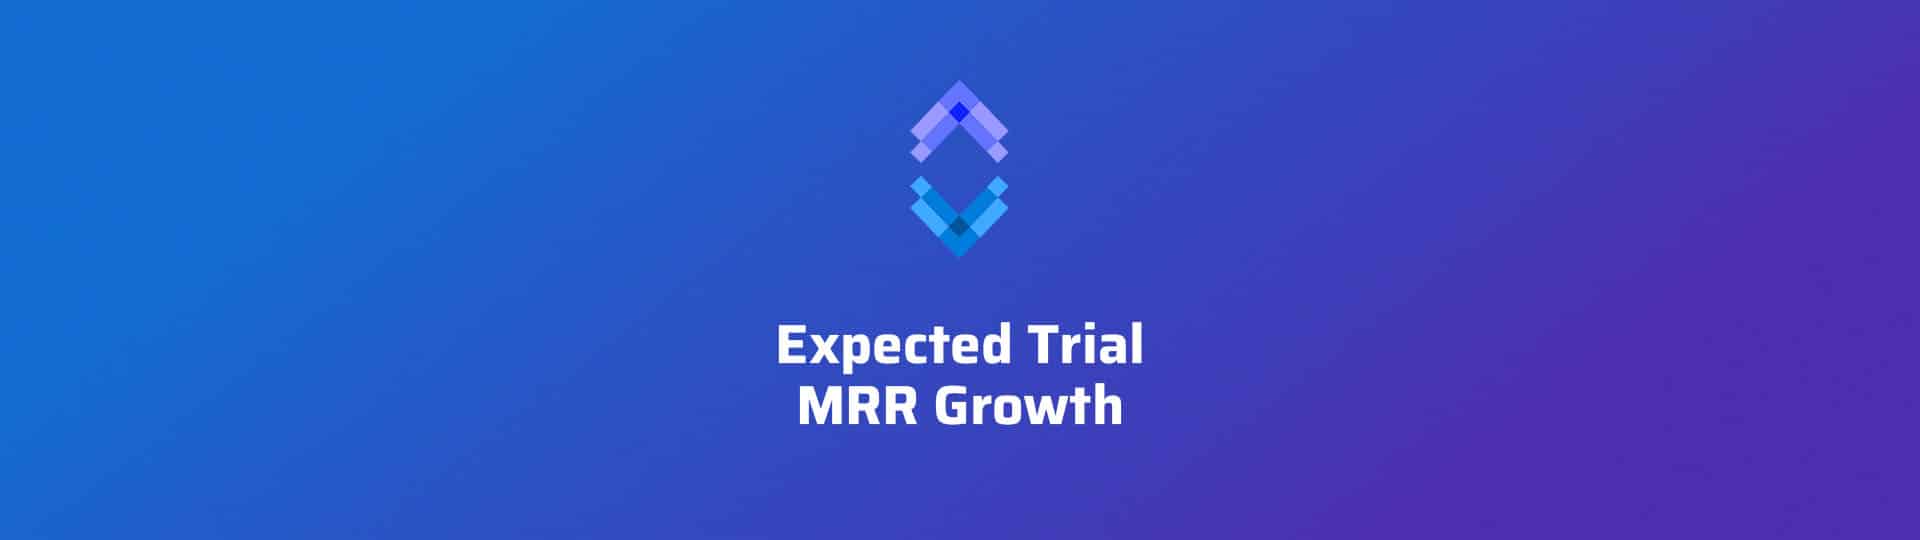 Expected Trial Growth